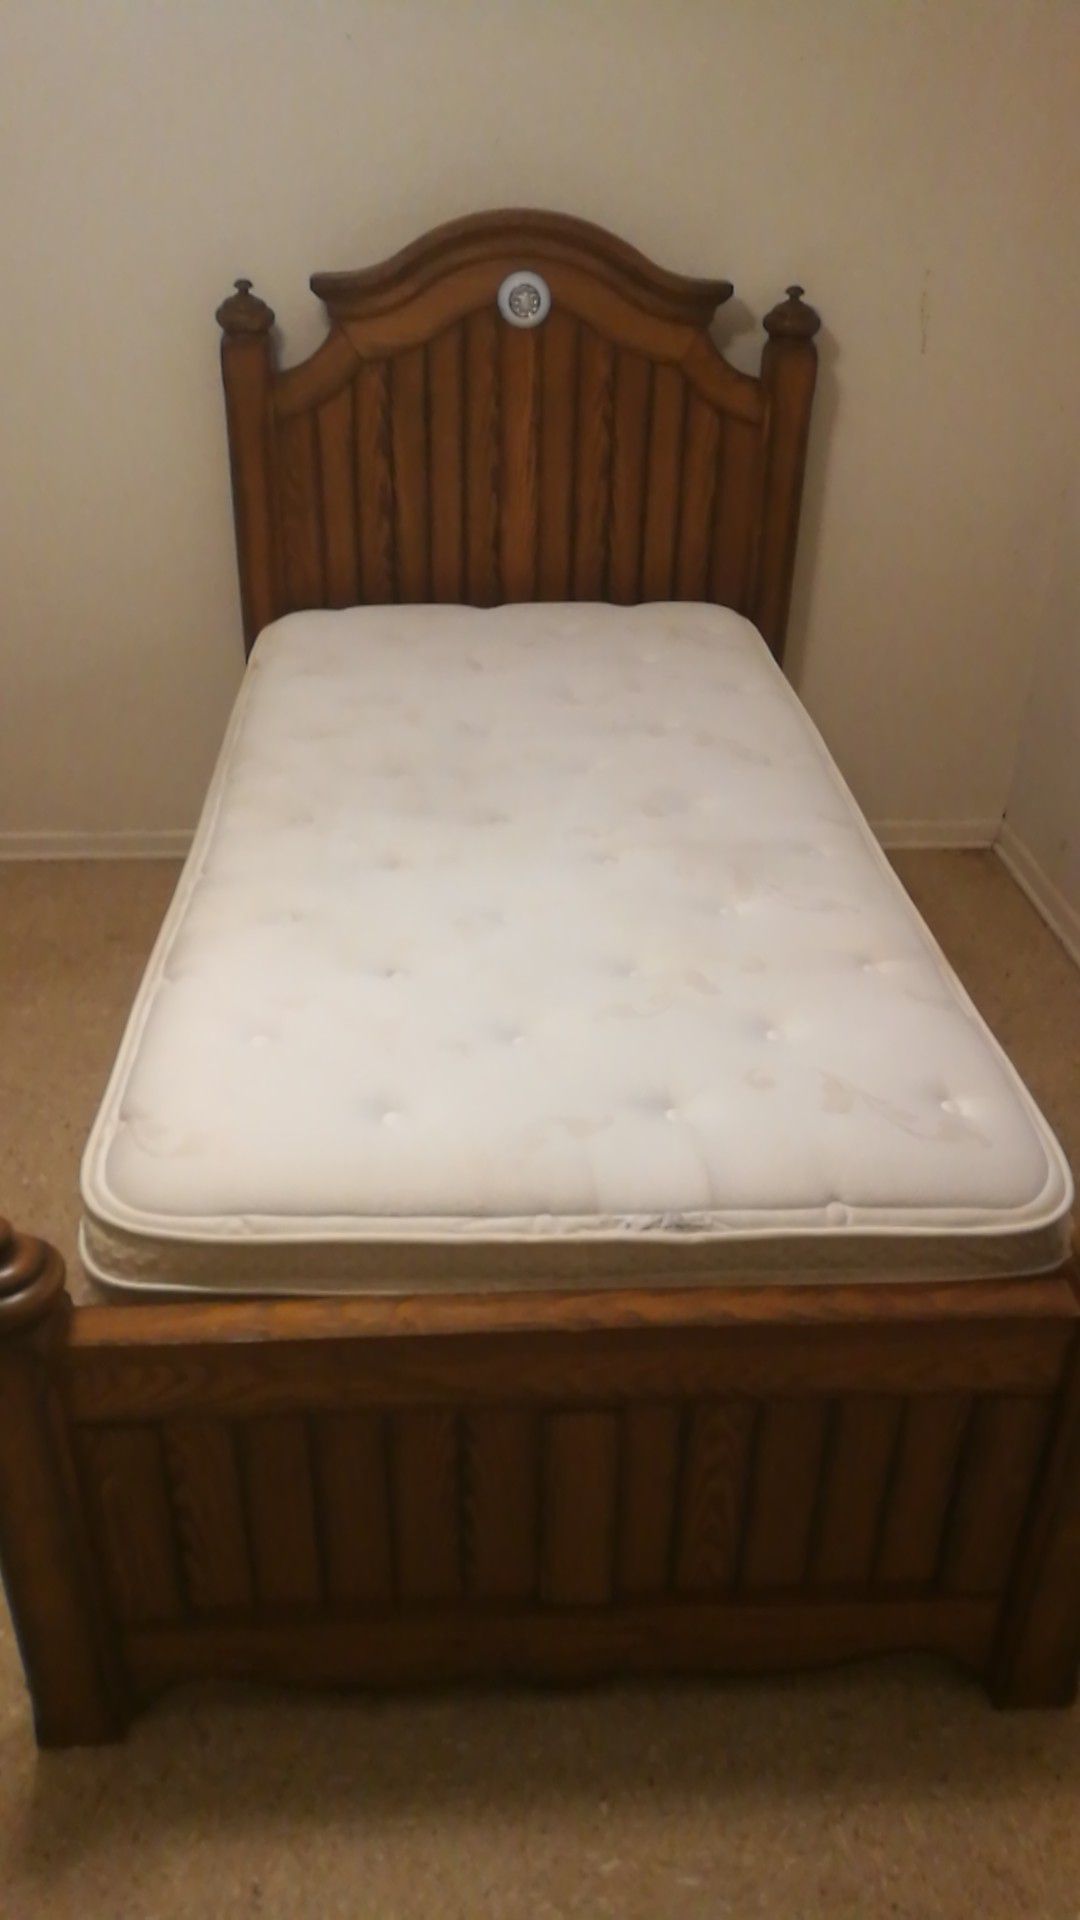 Solid wood twin bed frame with mattress.